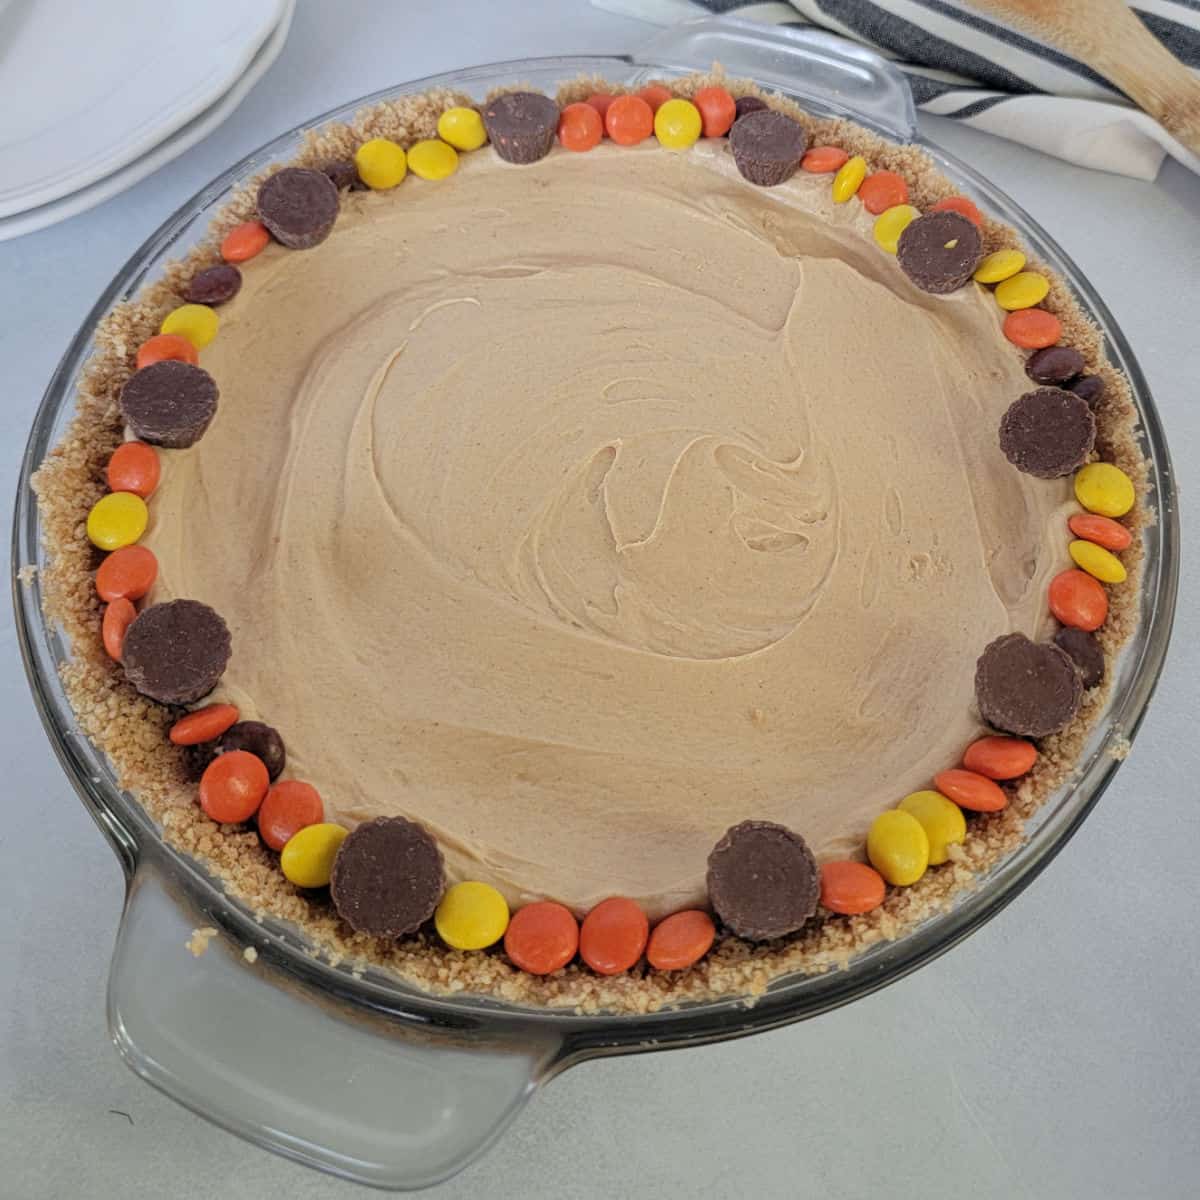 No bake peanut butter pie rimmed in reeses pieces